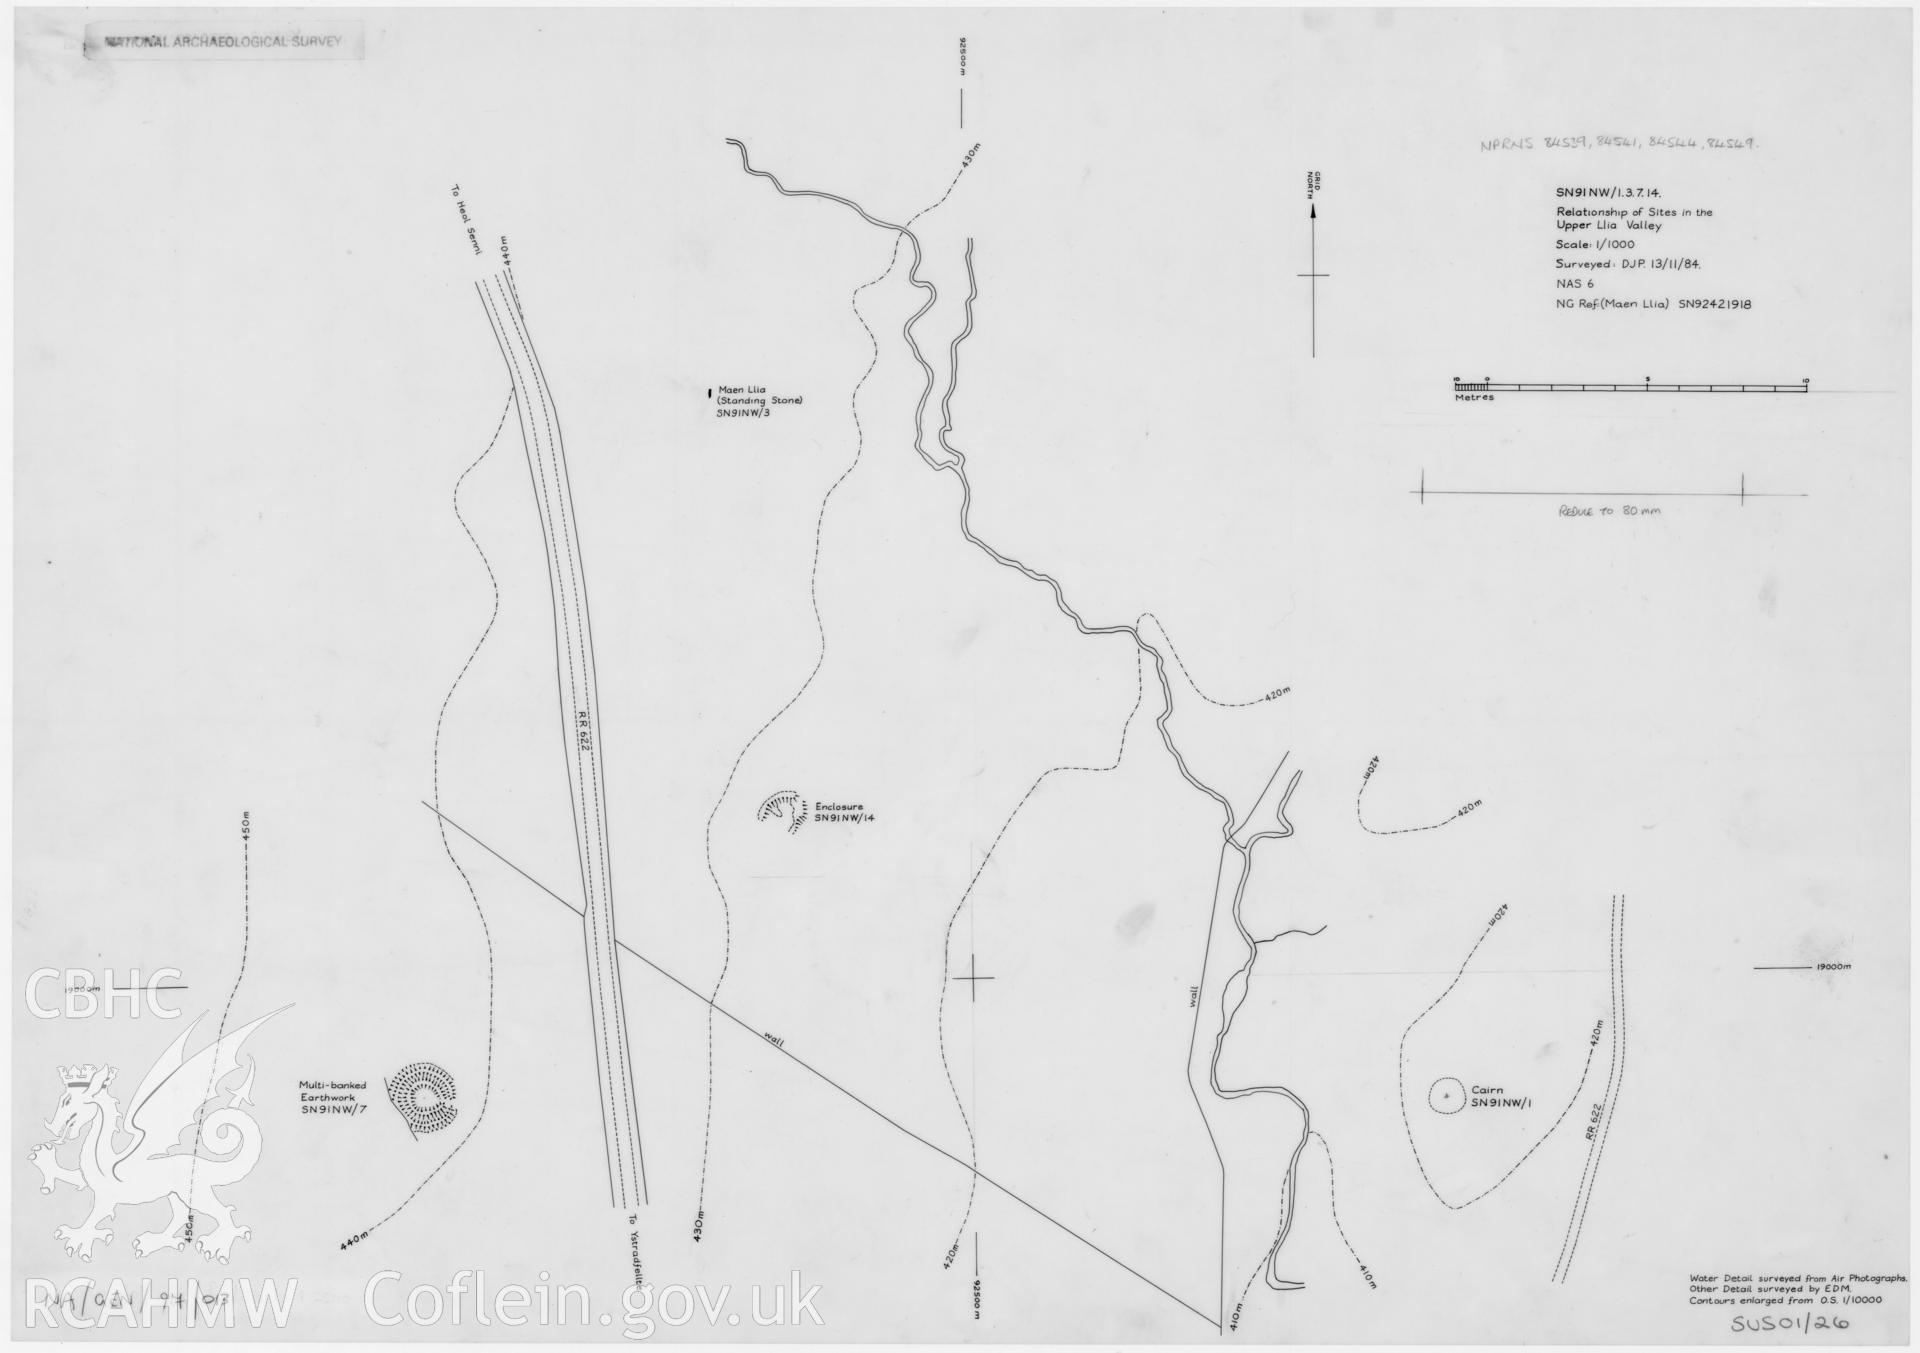 Ink on film, measured multisite plan showing relationship of sites in the Upper Llia Valley, consisting of Rhyd Uchaf Cairn, Rhyd Uchaf Platform, Maen Llia Standing Stone and Llech-Llia Ring Barrow,  produced as part of the Southern Uplands Survey by D.J. Percival on   (Ref Numbers SN91NW/1,3,7,14;  National Archaeological Survey 6)